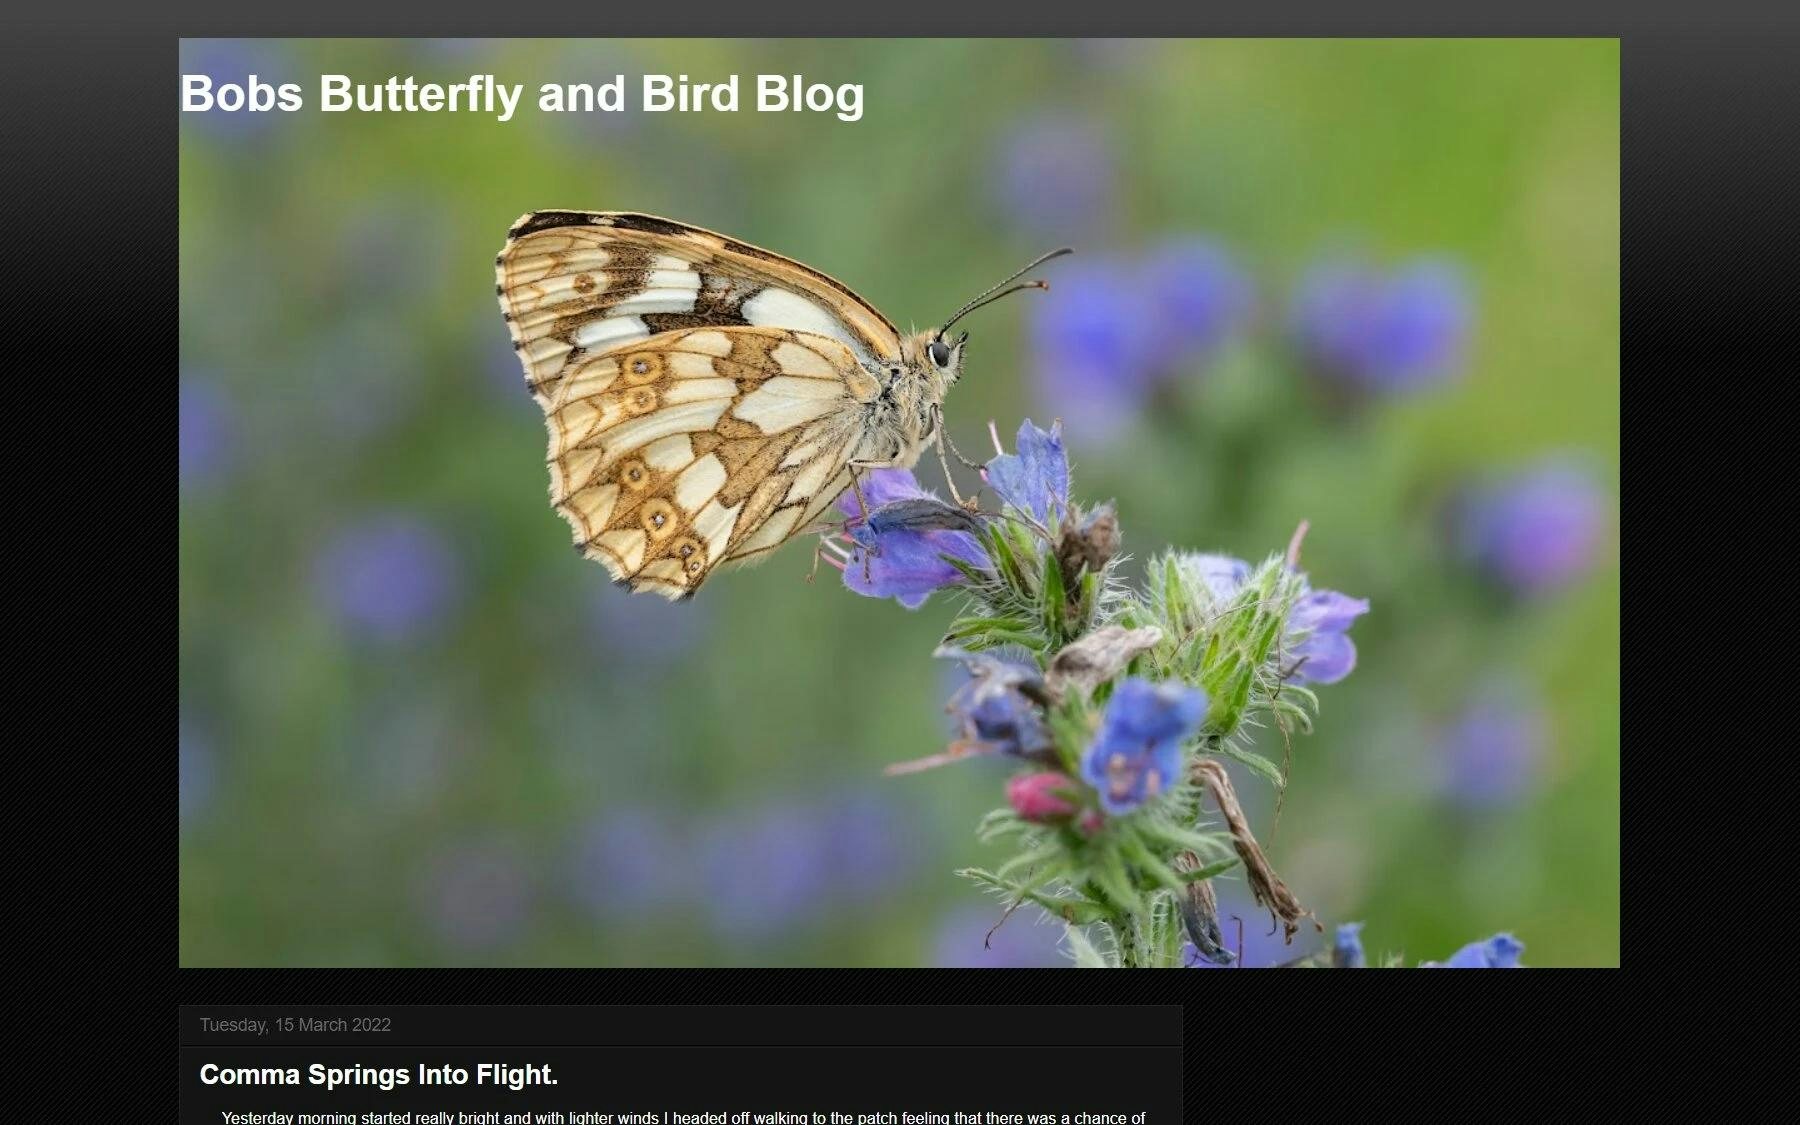 Bobs Butterfly and Bird Blog photography blog